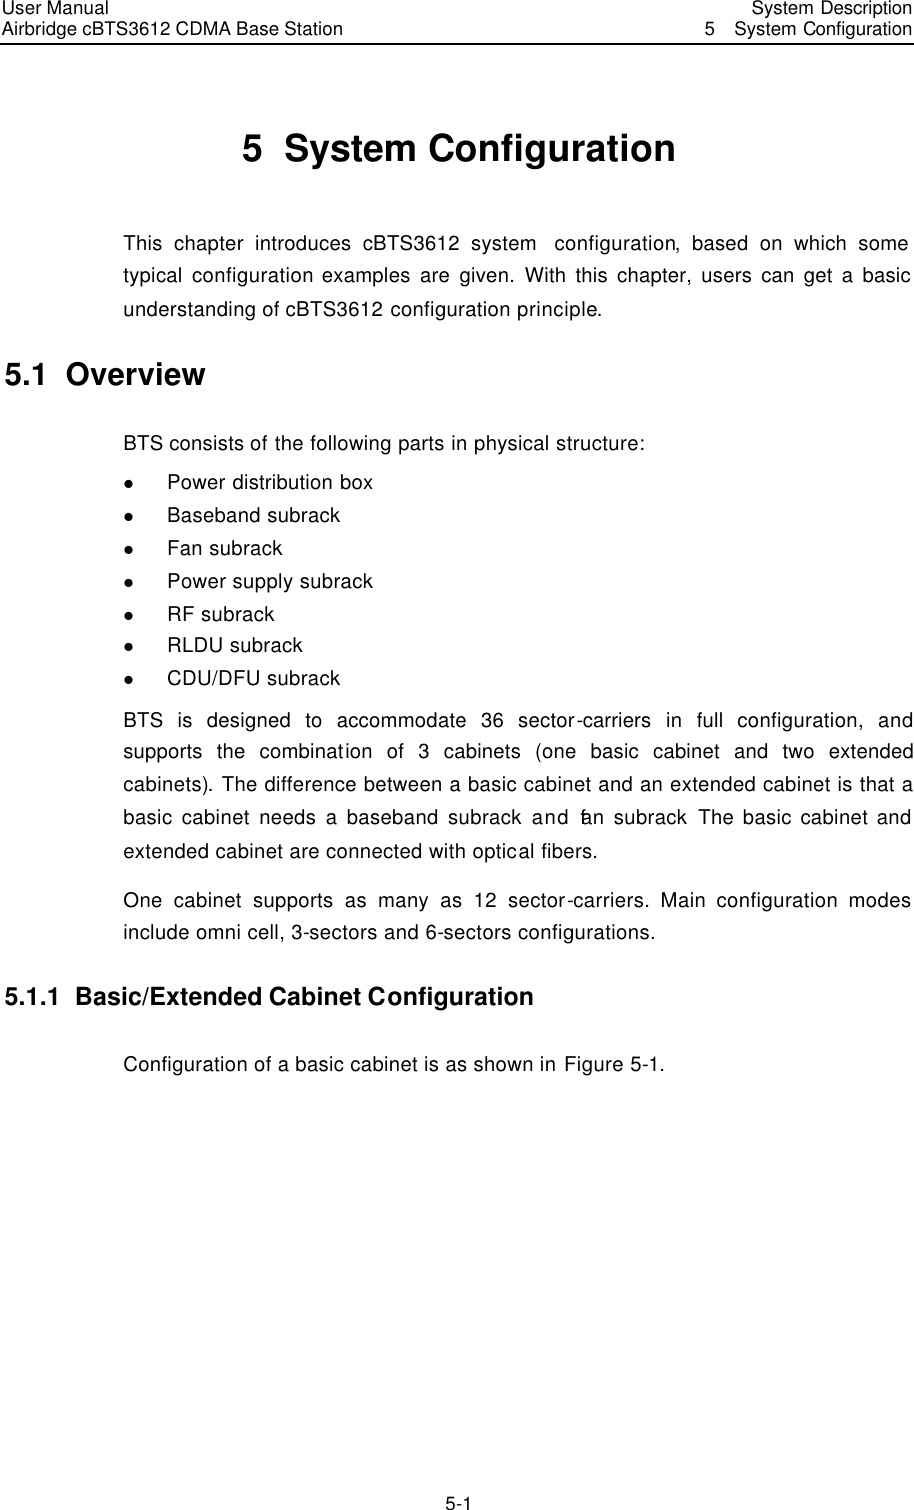 User Manual Airbridge cBTS3612 CDMA Base Station   System Description5  System Configuration 5-1 5  System Configuration This chapter introduces cBTS3612 system  configuration, based on which some typical configuration examples are given.  With this chapter, users can get a basic understanding of cBTS3612 configuration principle.   5.1  Overview BTS consists of the following parts in physical structure:   l Power distribution box l Baseband subrack   l Fan subrack l Power supply subrack l RF subrack l RLDU subrack l CDU/DFU subrack BTS is designed to accommodate 36 sector-carriers in full configuration,  and supports the combination of 3 cabinets (one basic cabinet and two extended cabinets). The difference between a basic cabinet and an extended cabinet is that a basic cabinet needs a baseband subrack and fan subrack The basic cabinet and extended cabinet are connected with optical fibers.   One cabinet supports as many as 12 sector-carriers. Main configuration modes include omni cell, 3-sectors and 6-sectors configurations. 5.1.1  Basic/Extended Cabinet Configuration Configuration of a basic cabinet is as shown in Figure 5-1.   